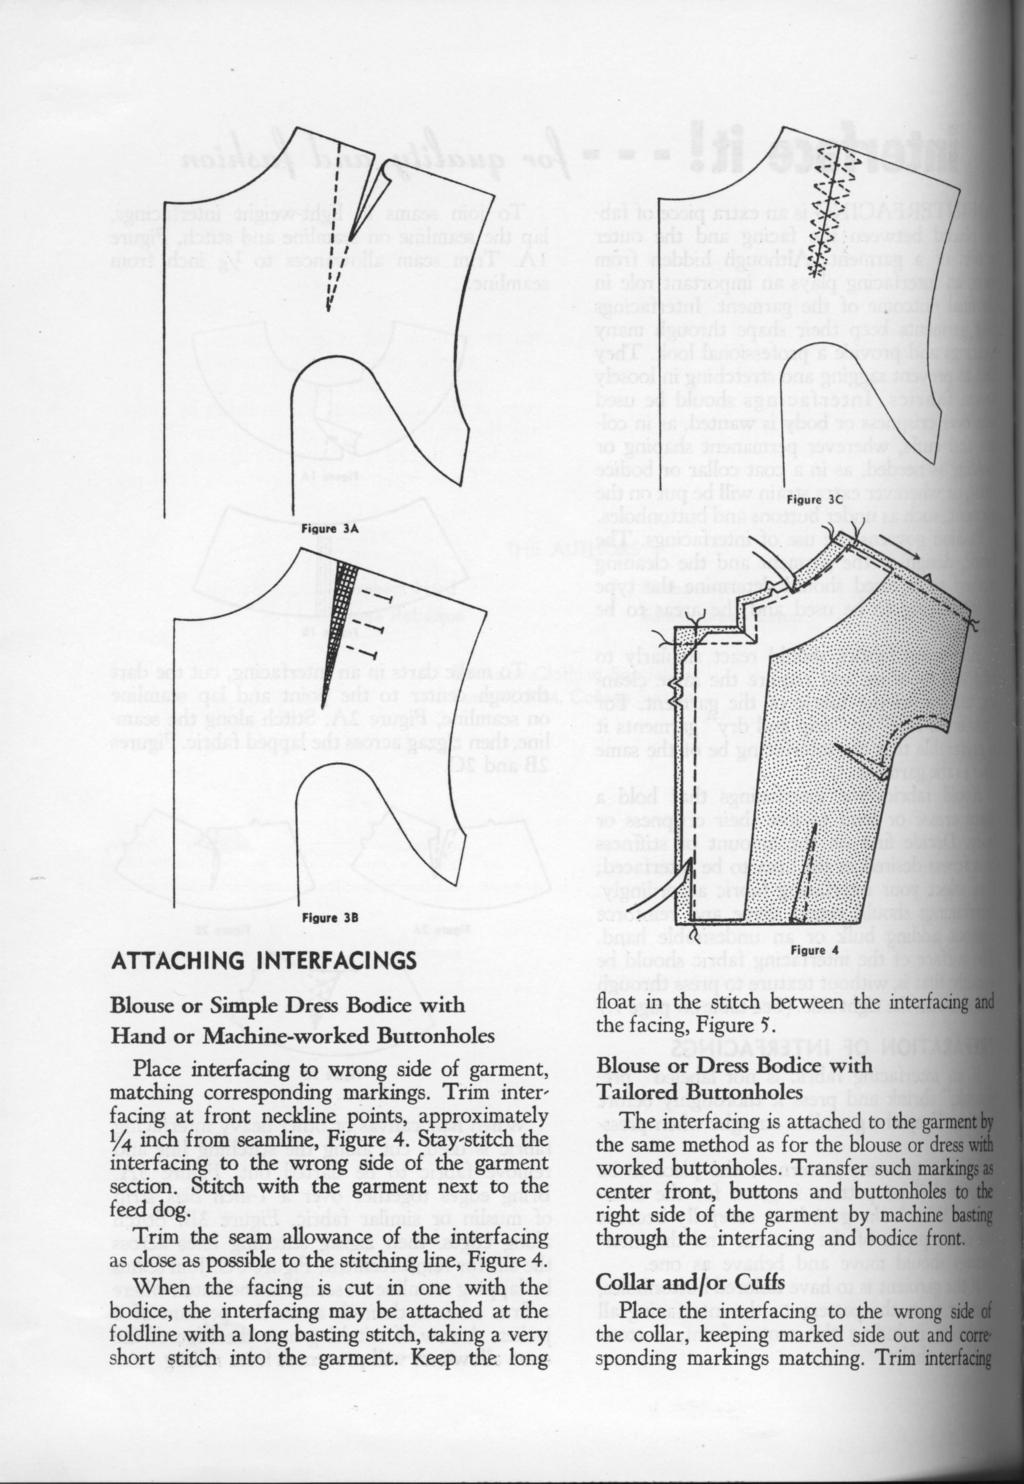 Figure 3A Figure 3B ATTACHING INTERFACINGS Blouse or Simple Dress Bodice with Hand or Machine-worked Buttonholes Place interfacing to wrong side of garment matching corresponding markings Trim inter"